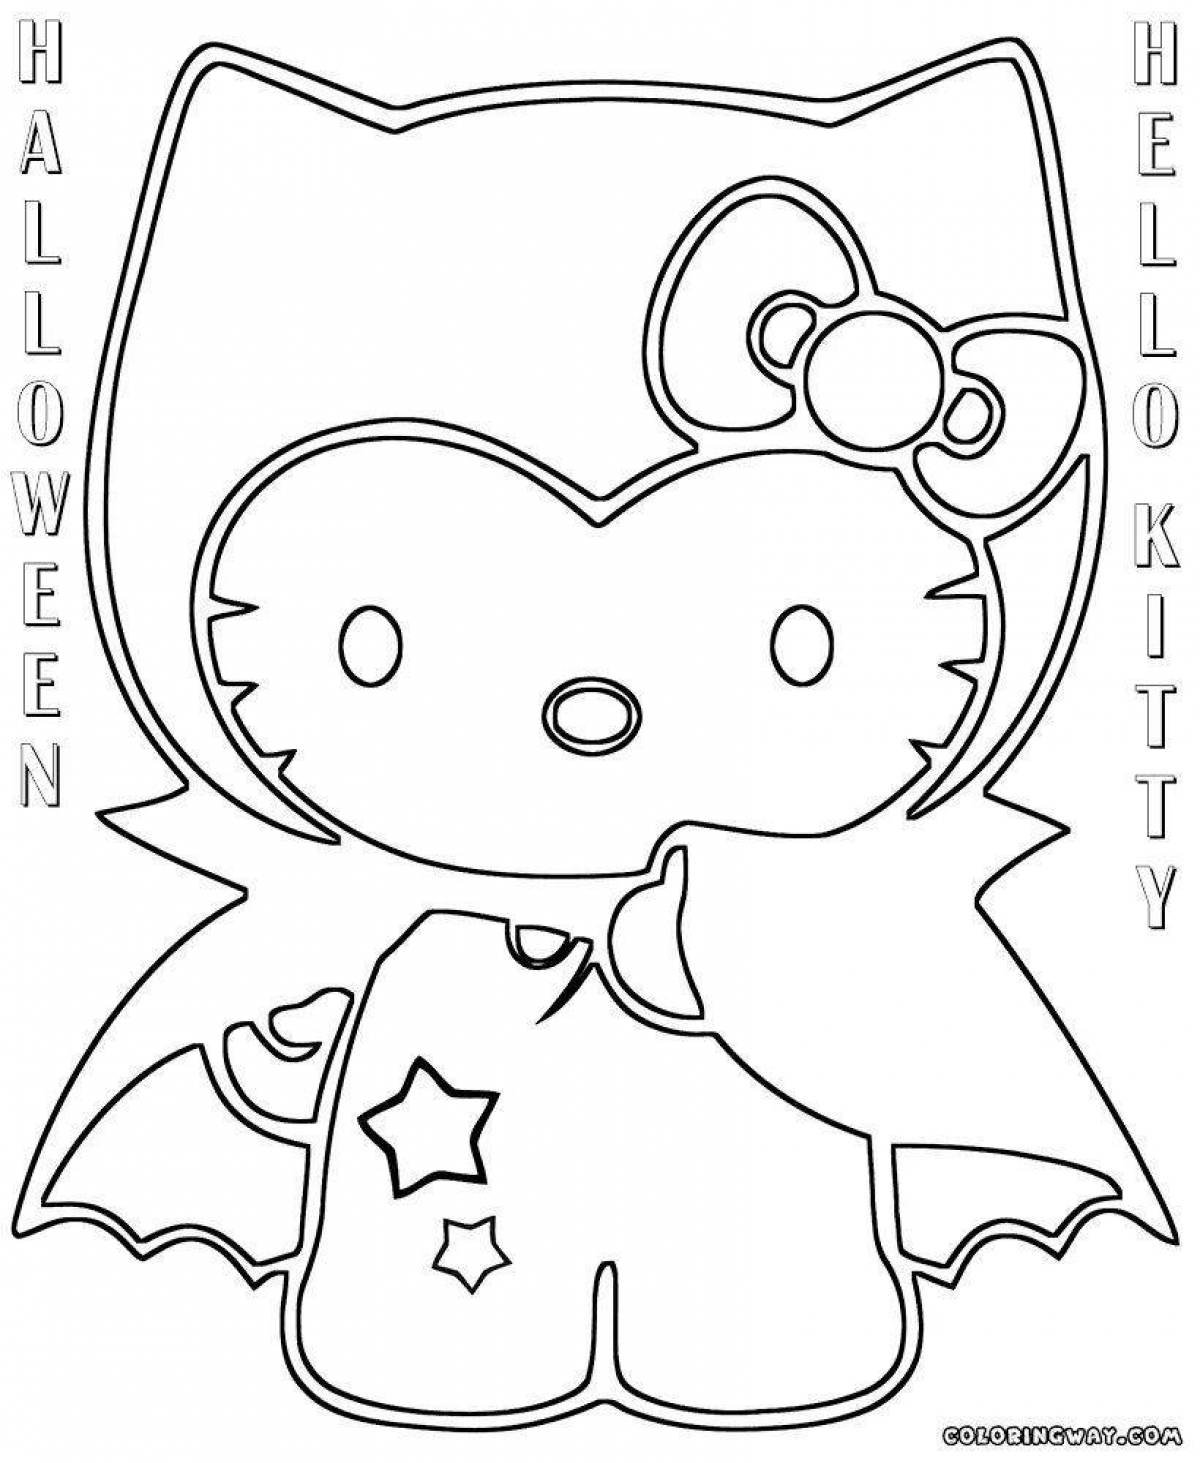 Horrifying halloween kitty coloring page